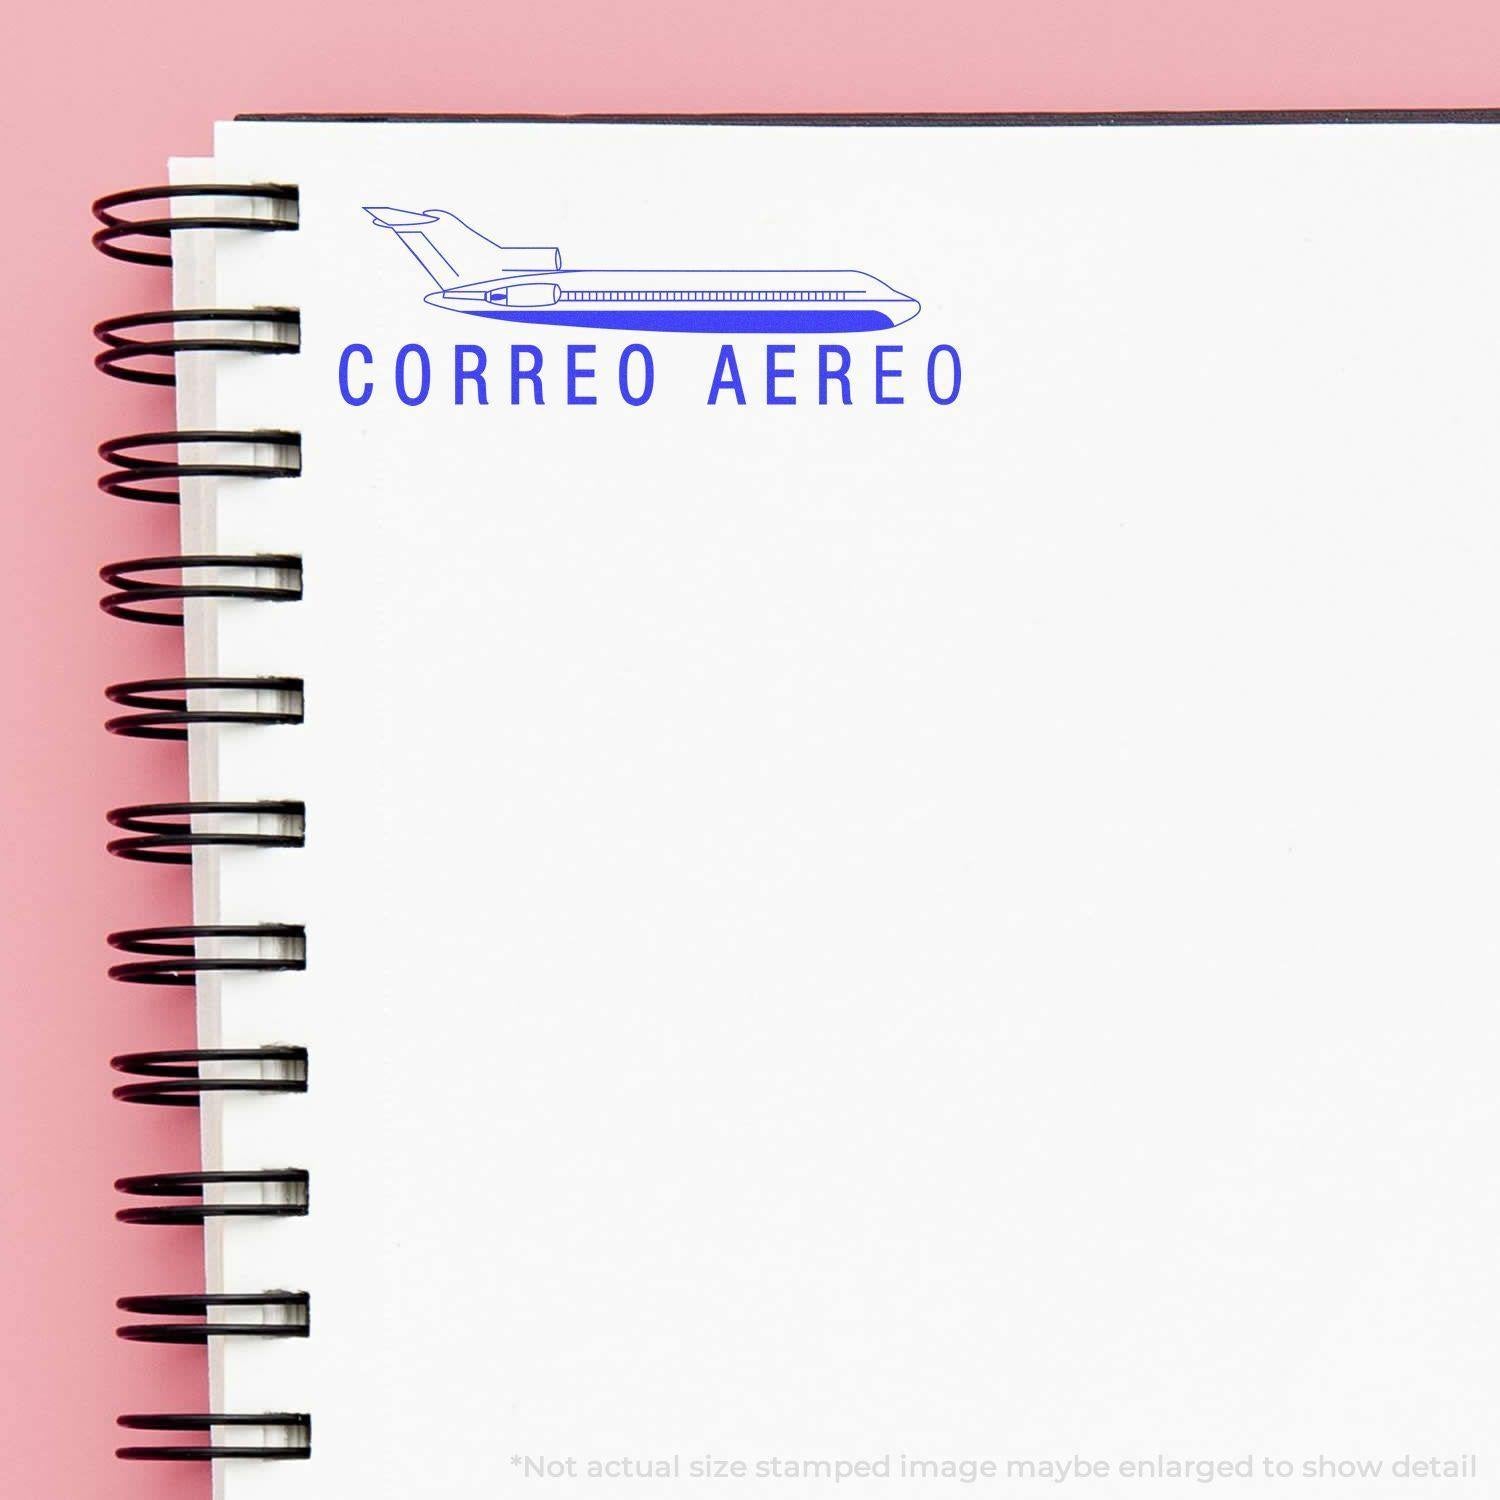 A self-inking stamp with a stamped image showing how the text "CORREO AERO" with an icon of an airplane above the text is displayed after stamping.